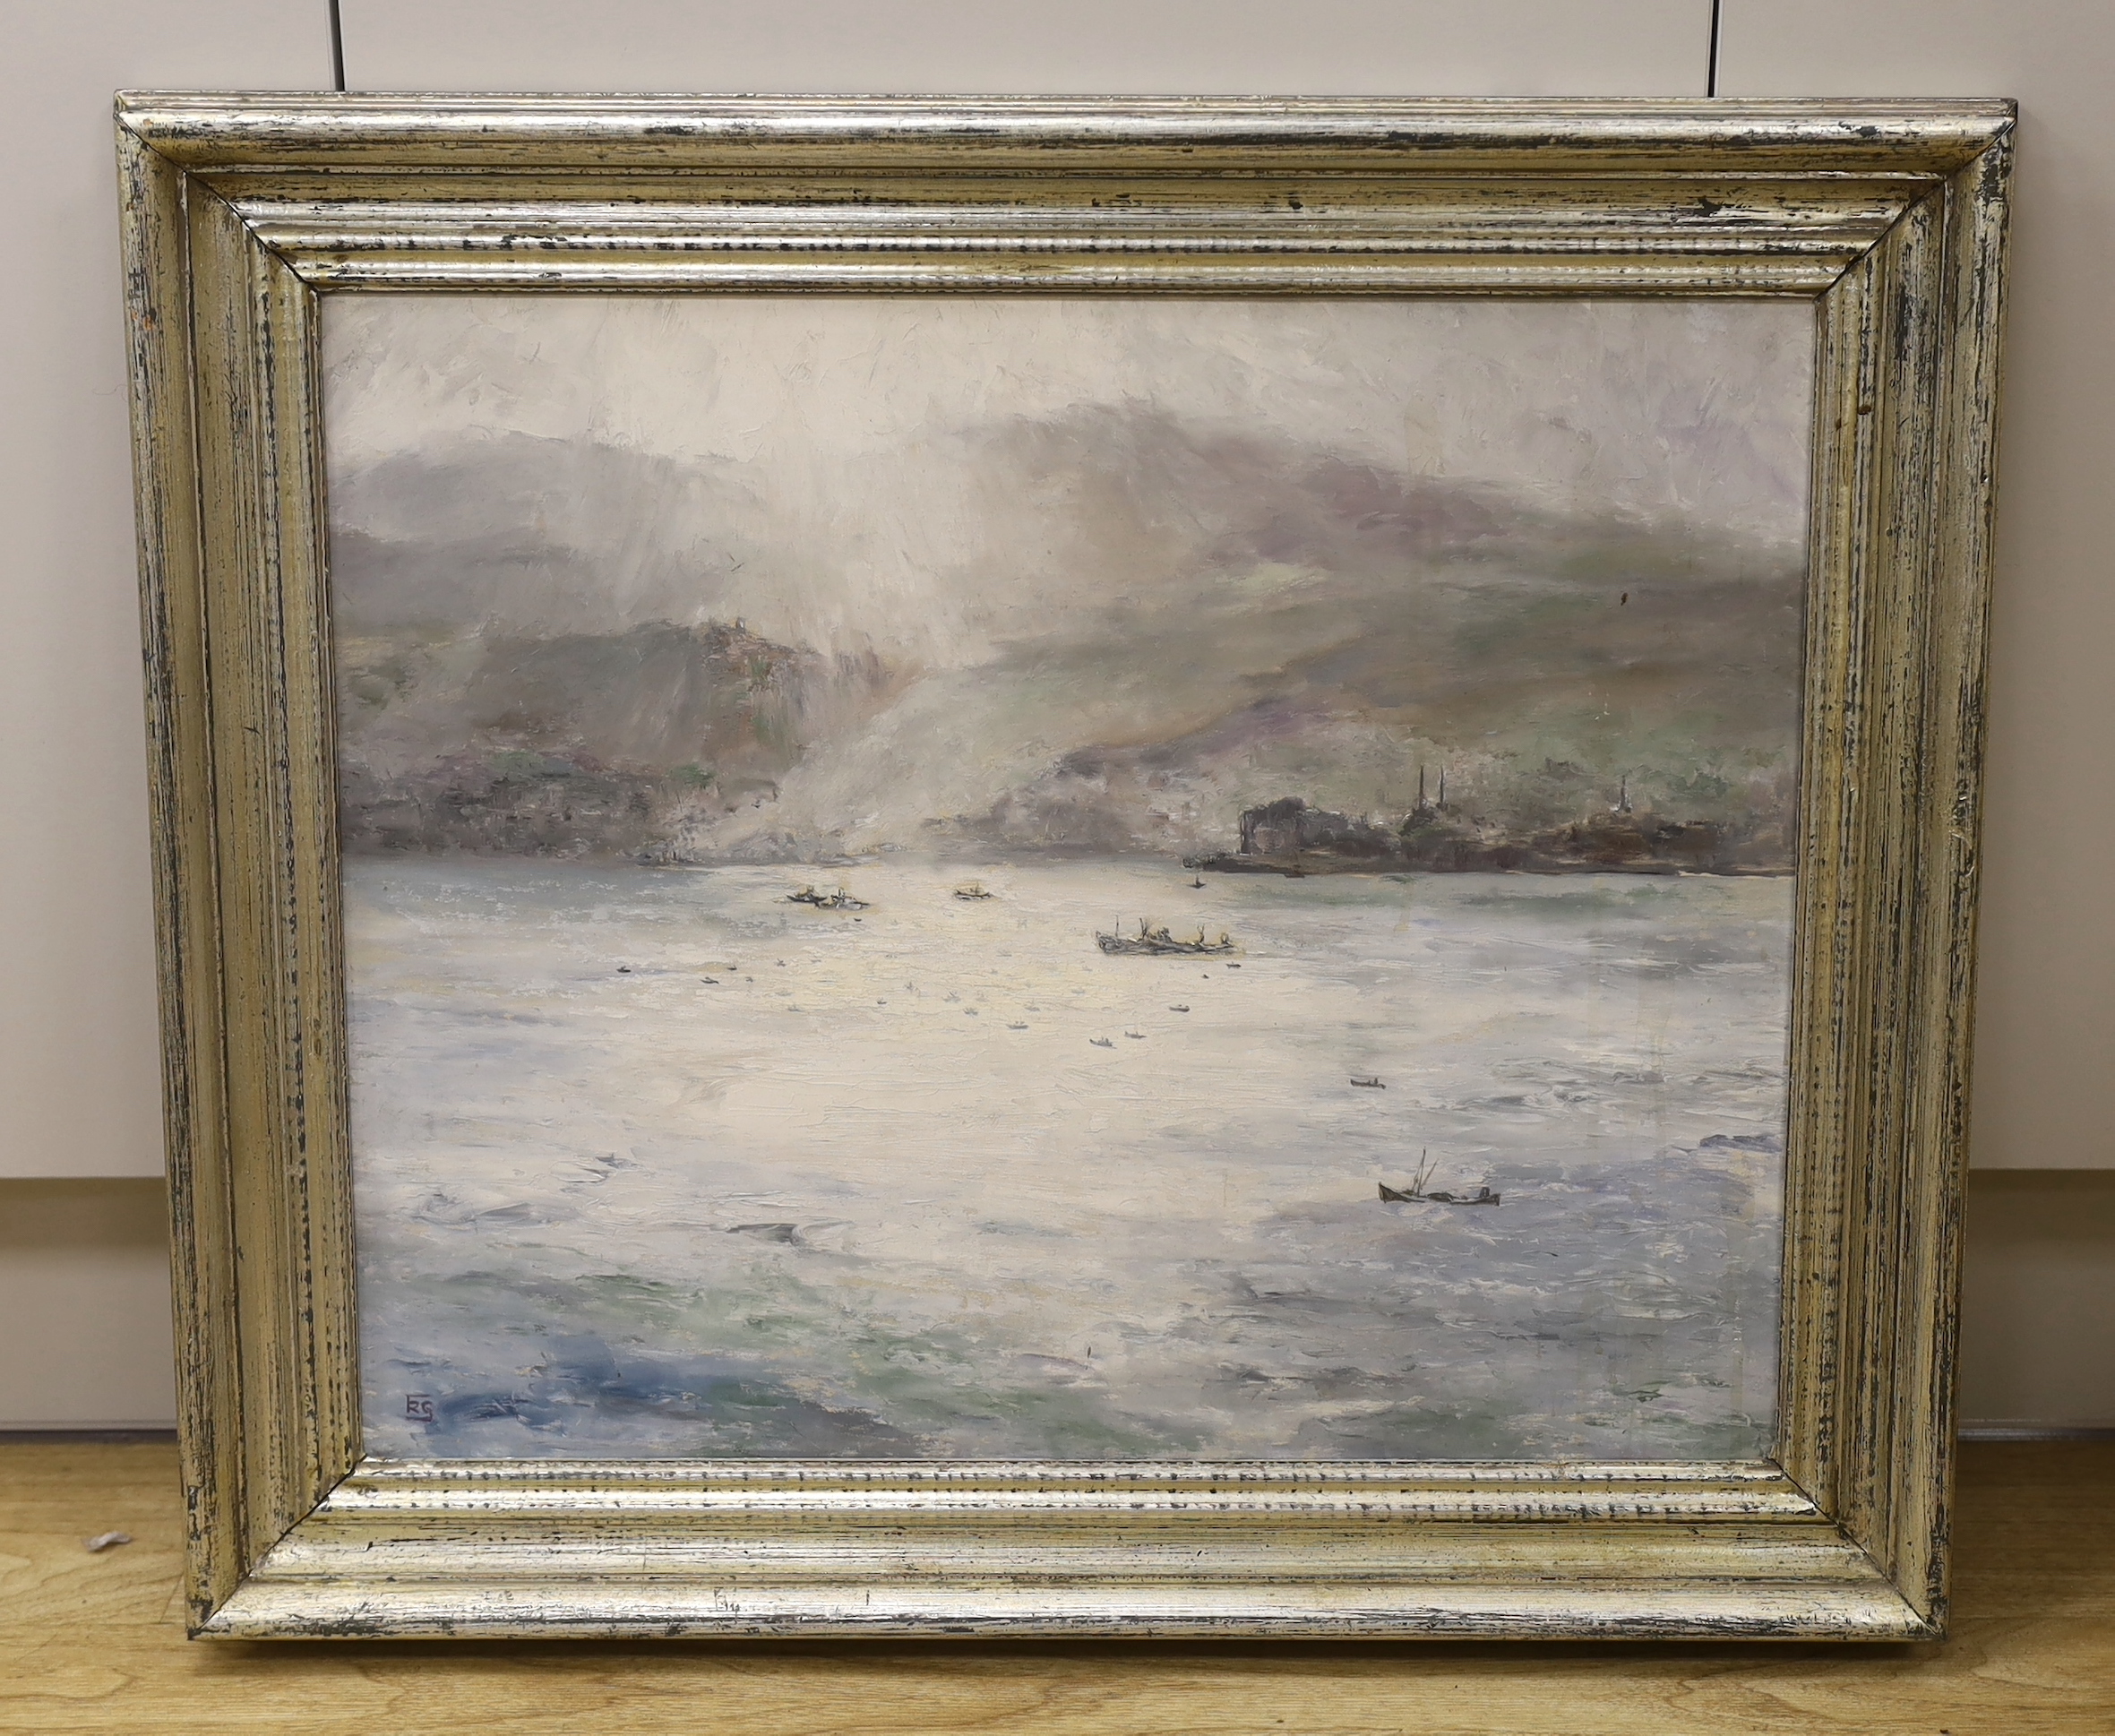 R Green, Impressionist oil on board, Seascape with boats before mountains, monogrammed, inscribed - Image 2 of 3